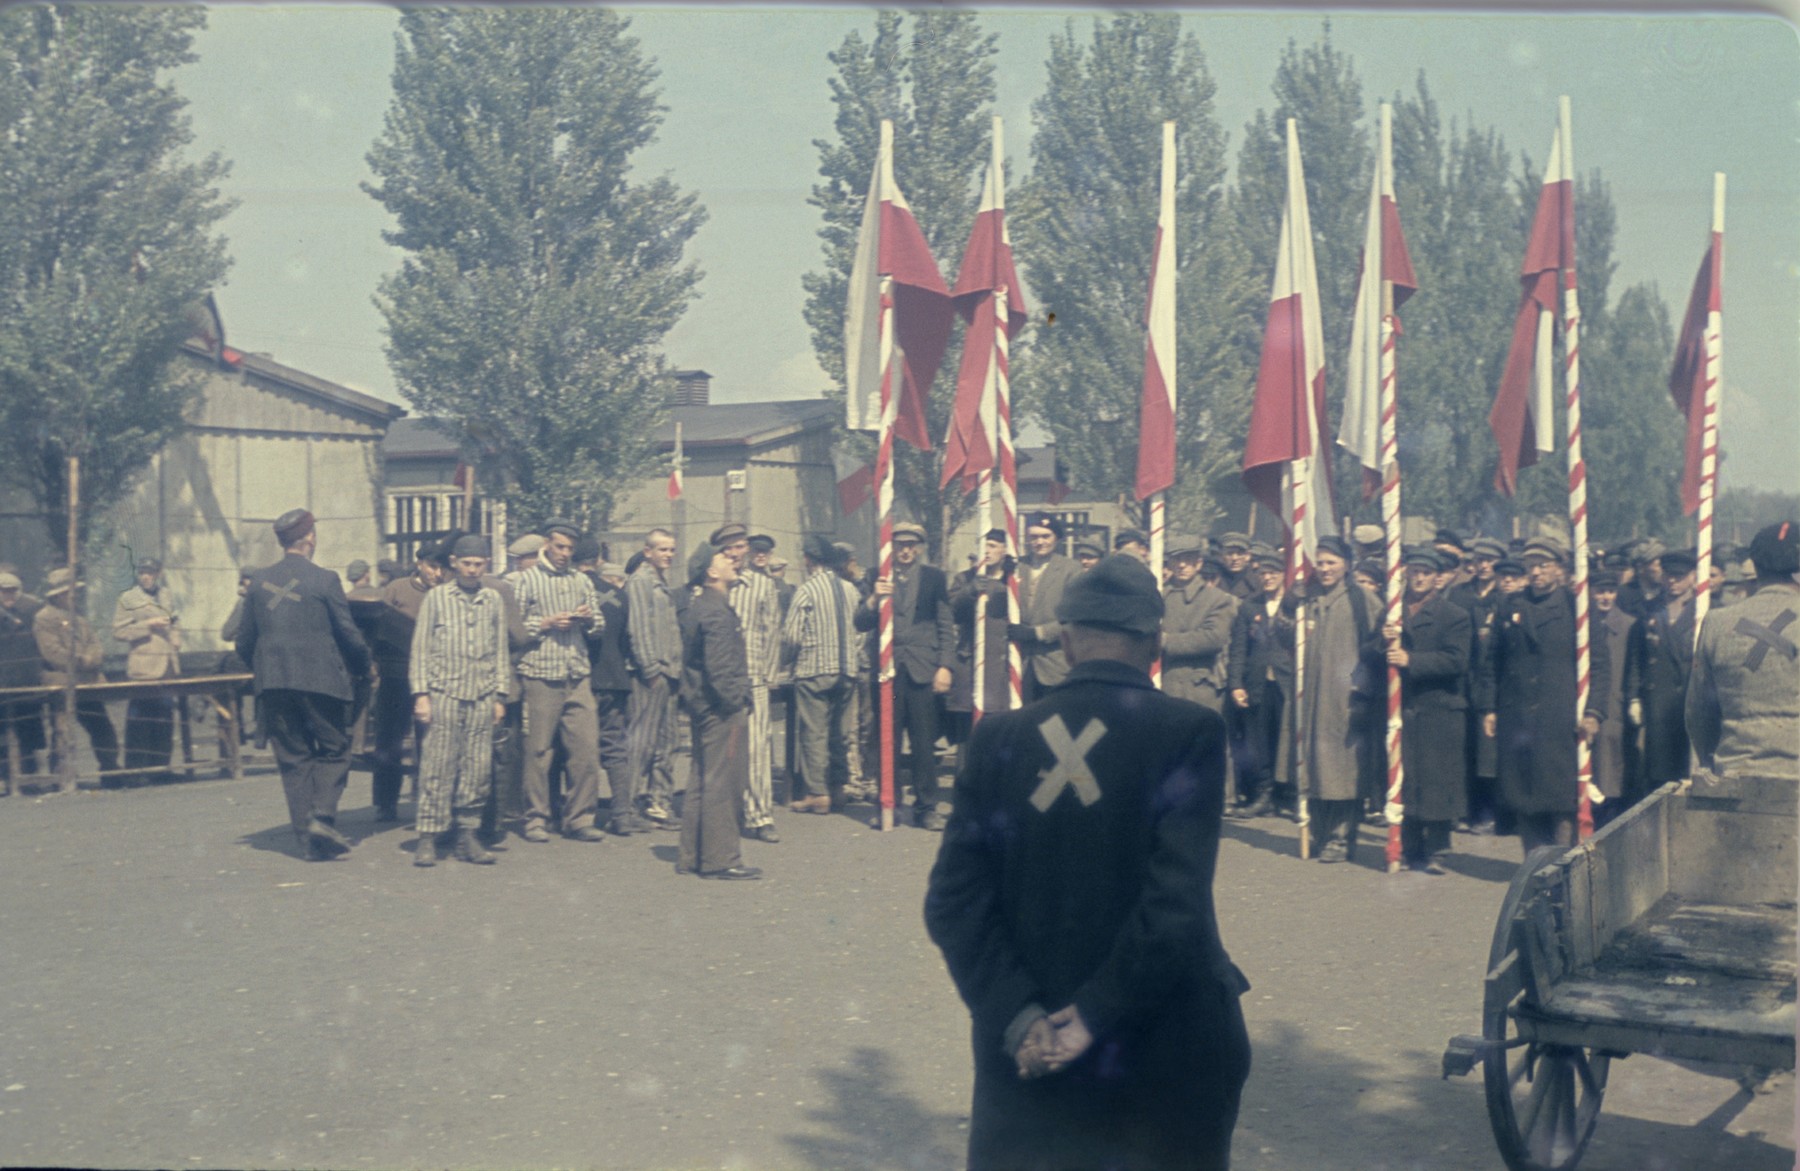 Former prisoners assemble outside for a ceremony with red and white flags in the newly liberated Dachau concentration camp.